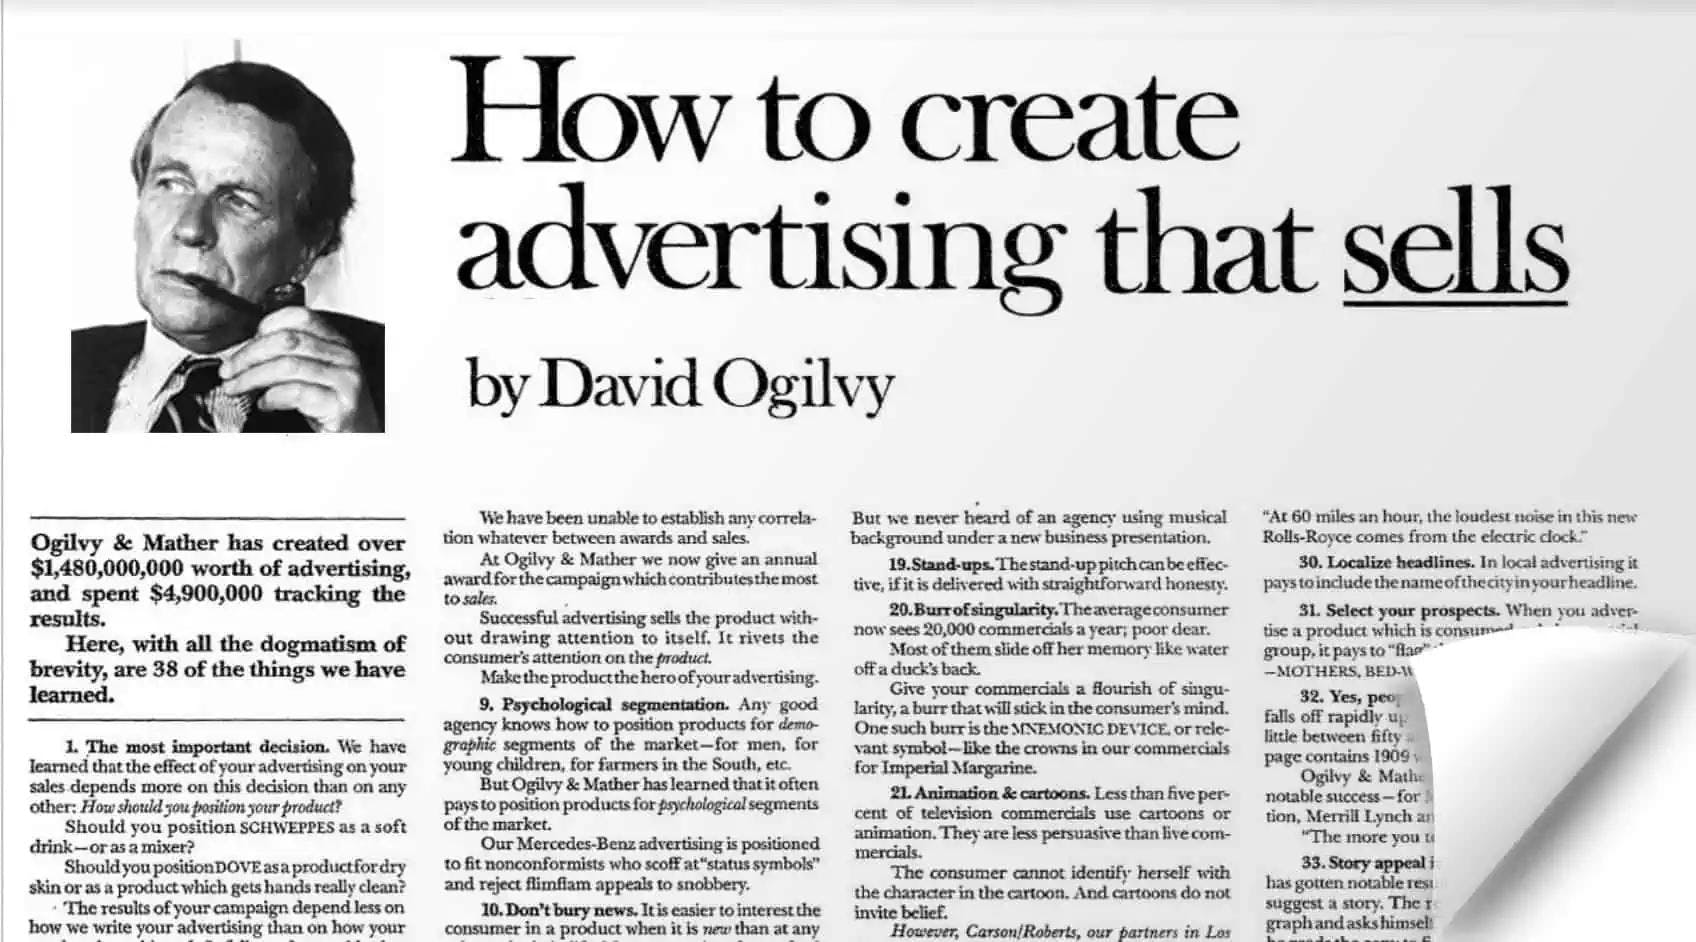 David Ogilvy — How to create advertising that sells